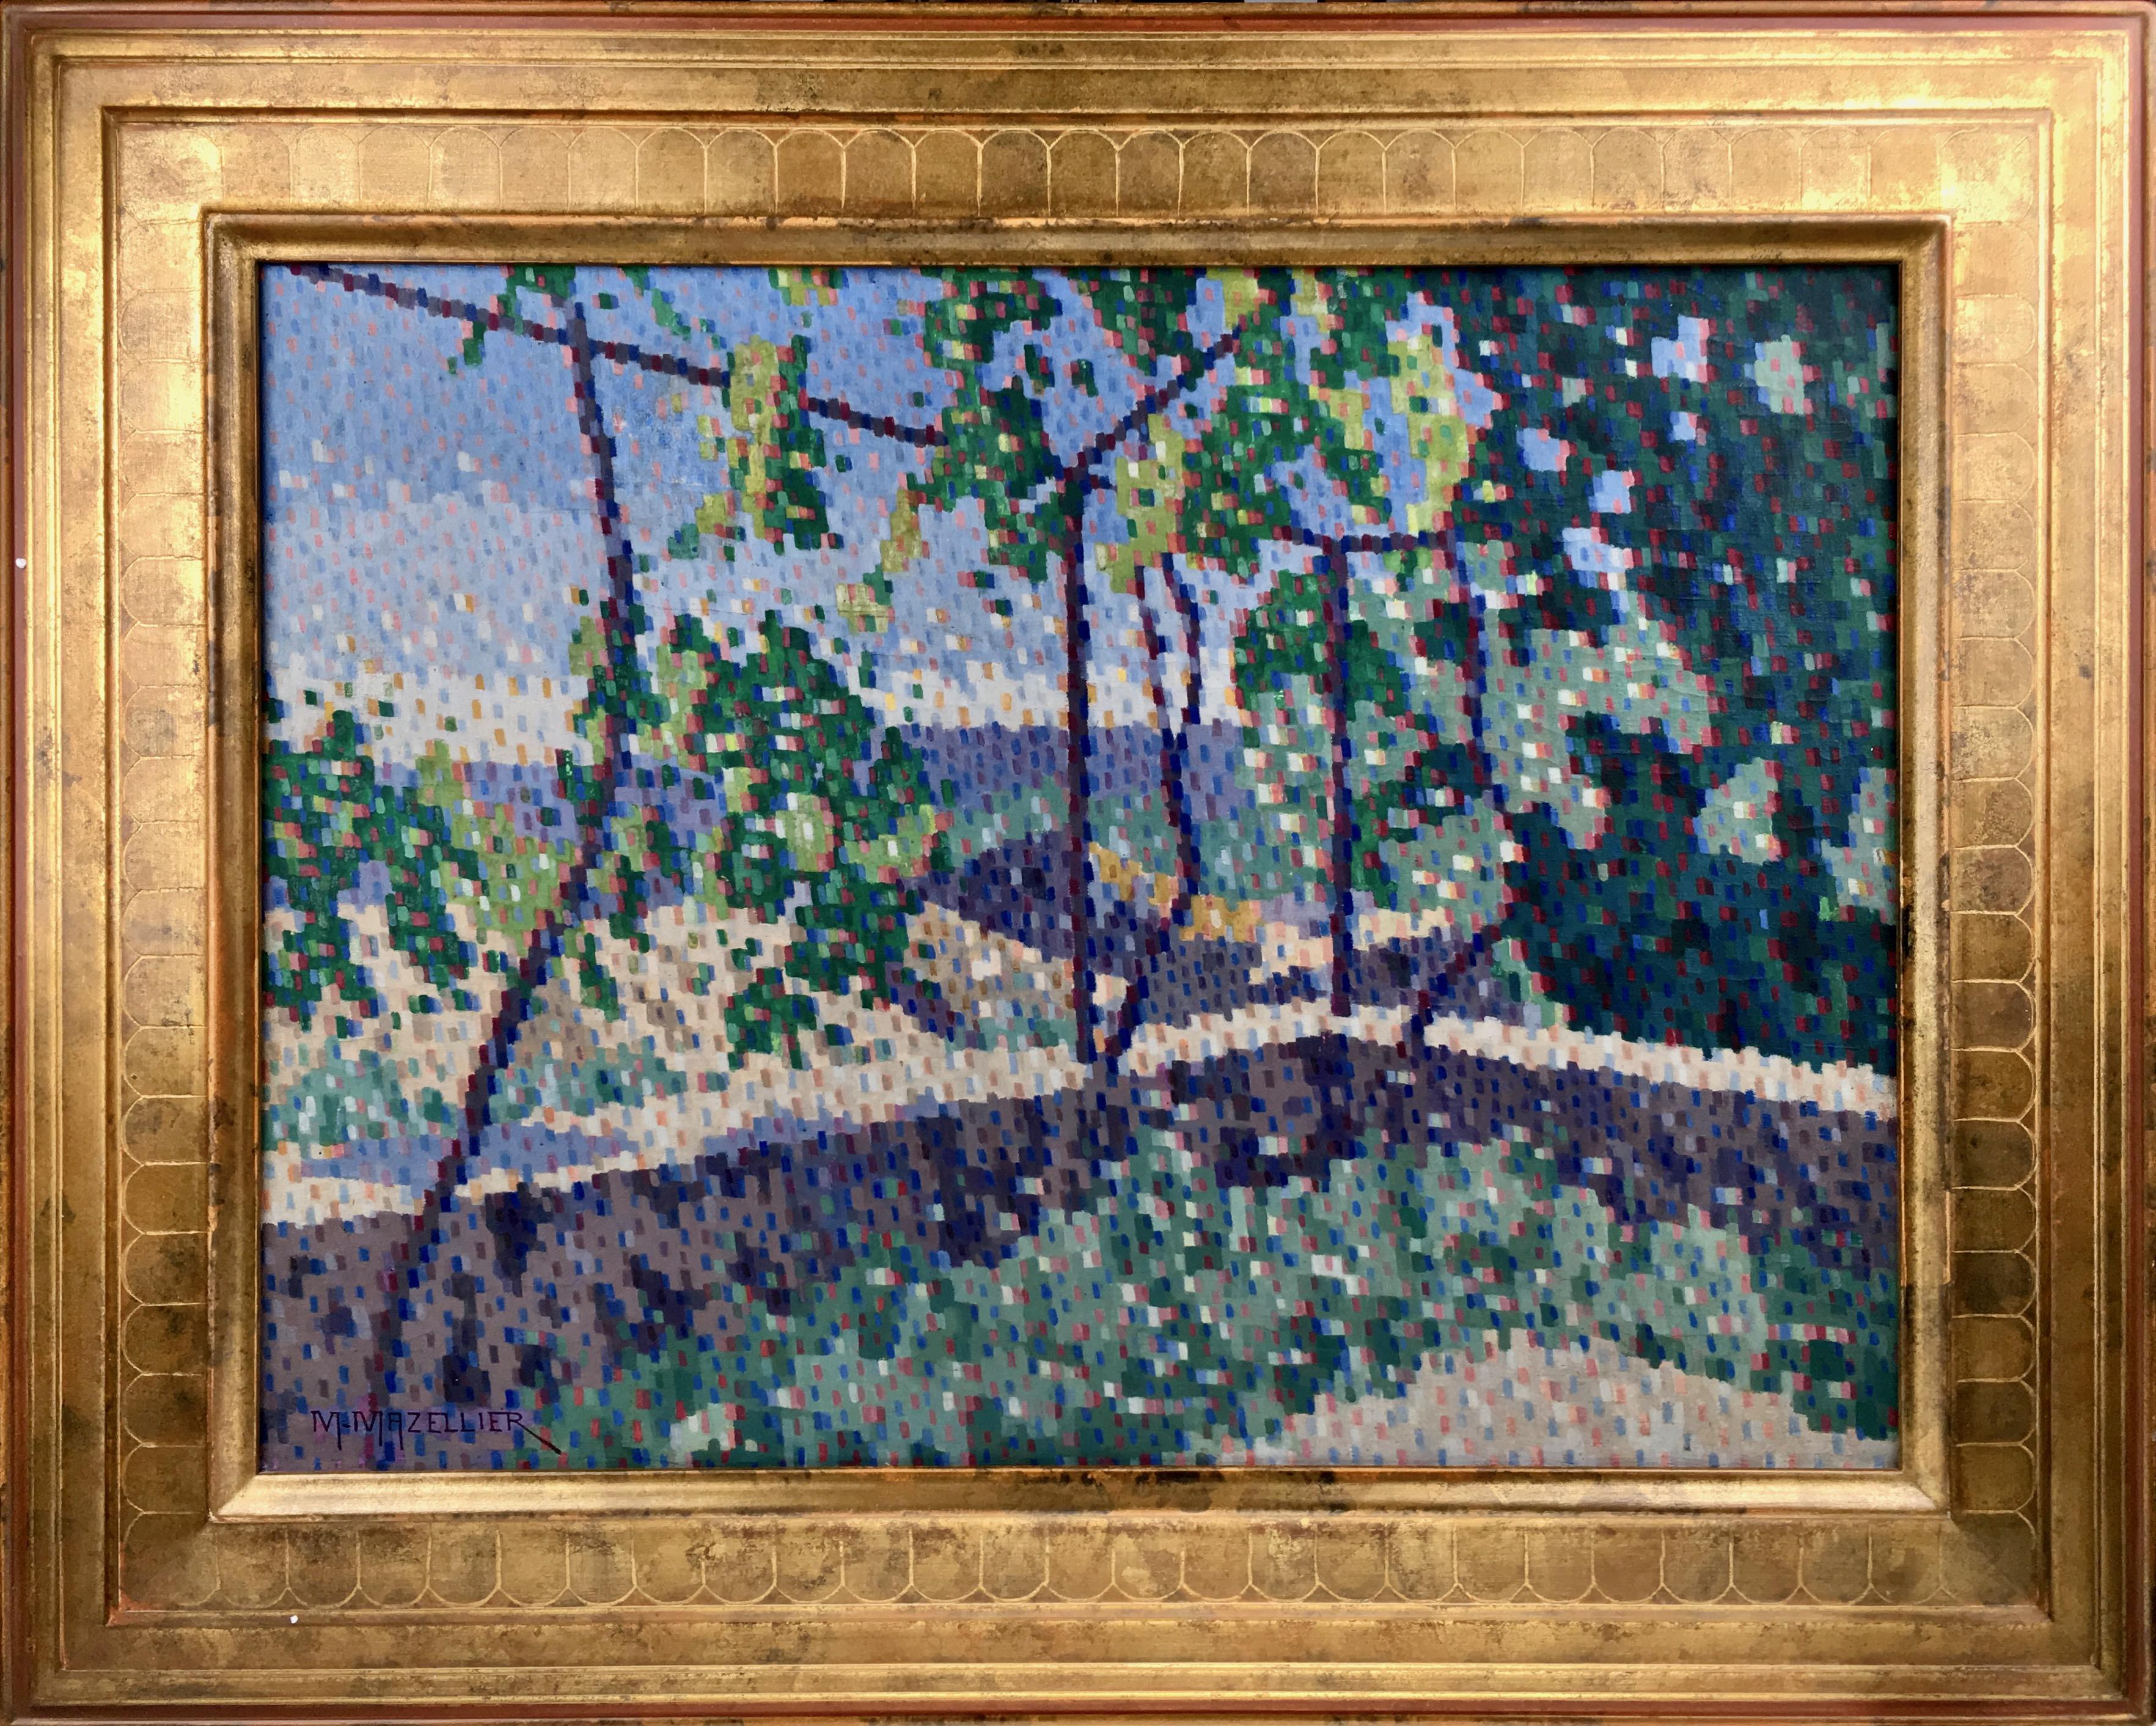 The Pergola - Gray Landscape Painting by Maurice Mazellier